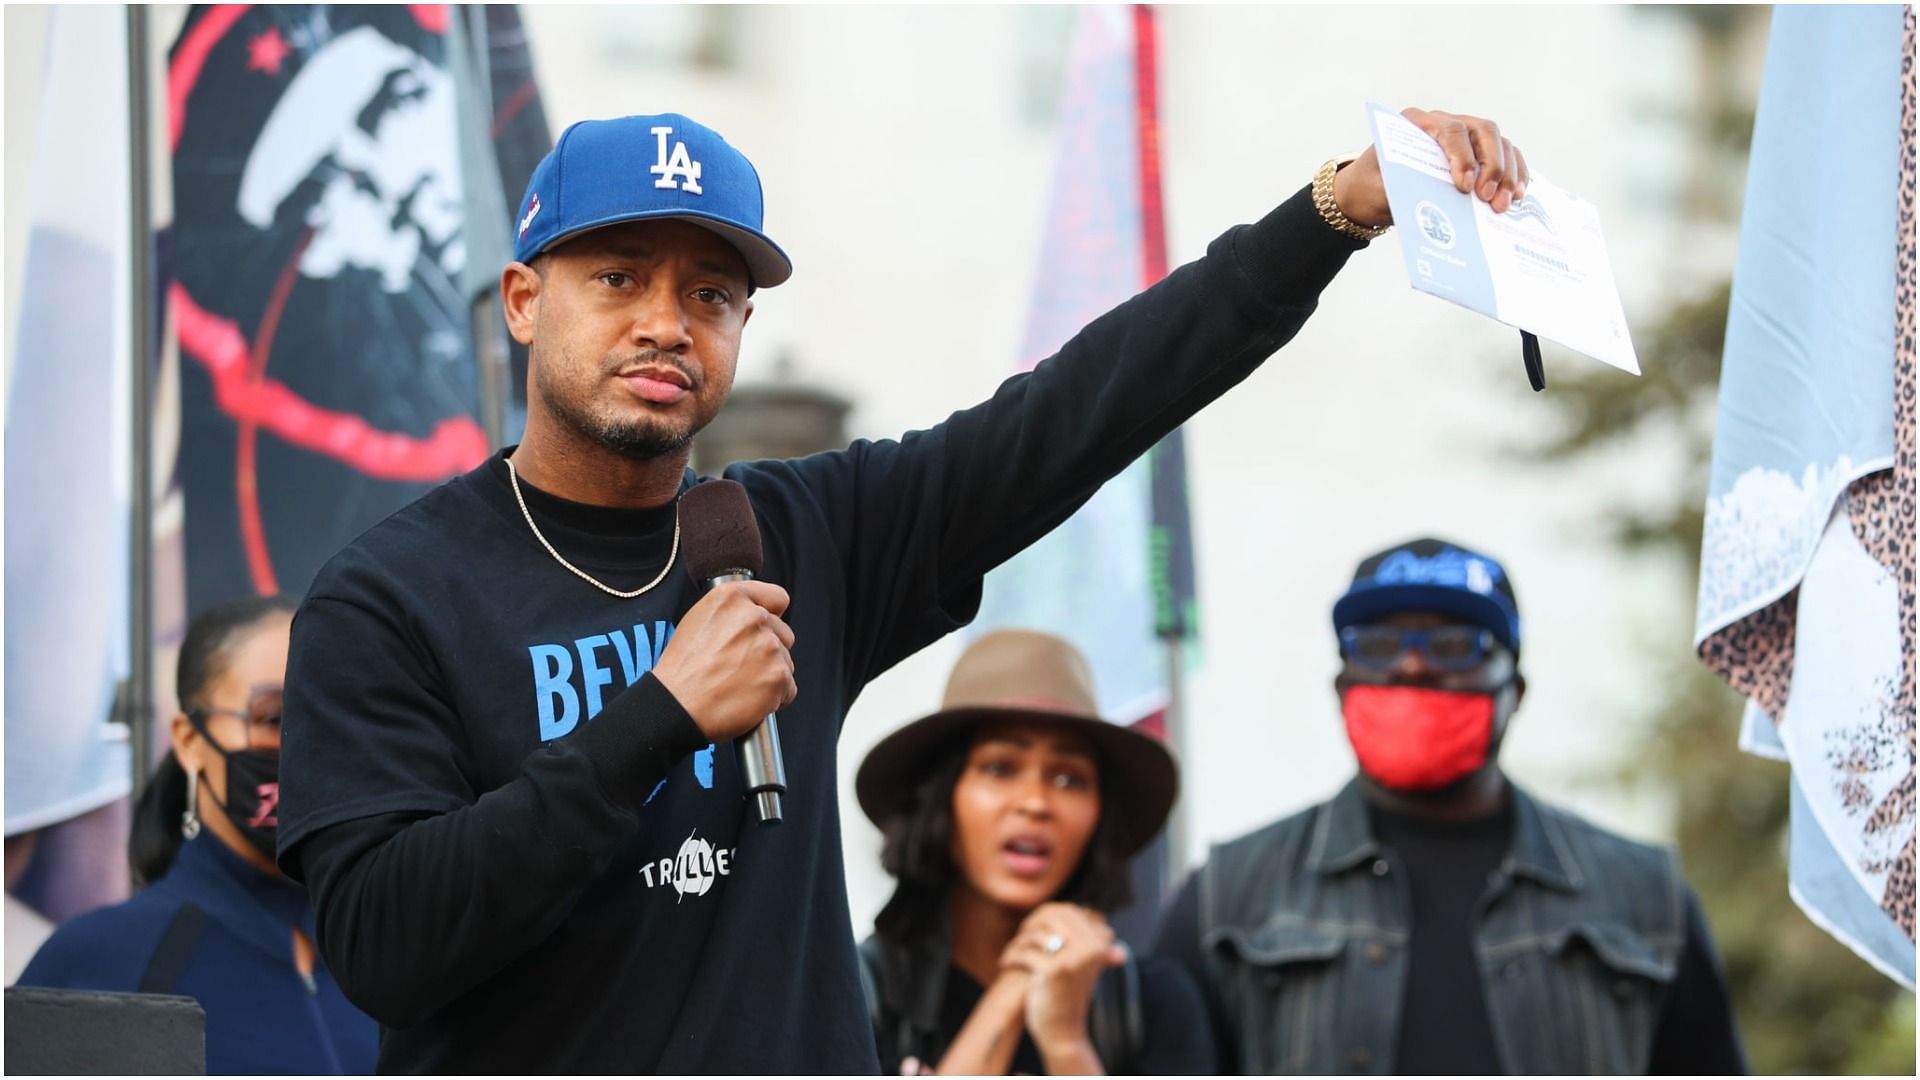 Terrence J speaks during the BLD PWR and Black Lives Matter Los Angeles final march to the polls on October 28, 2020, in Los Angeles, California (Image via Getty Images)